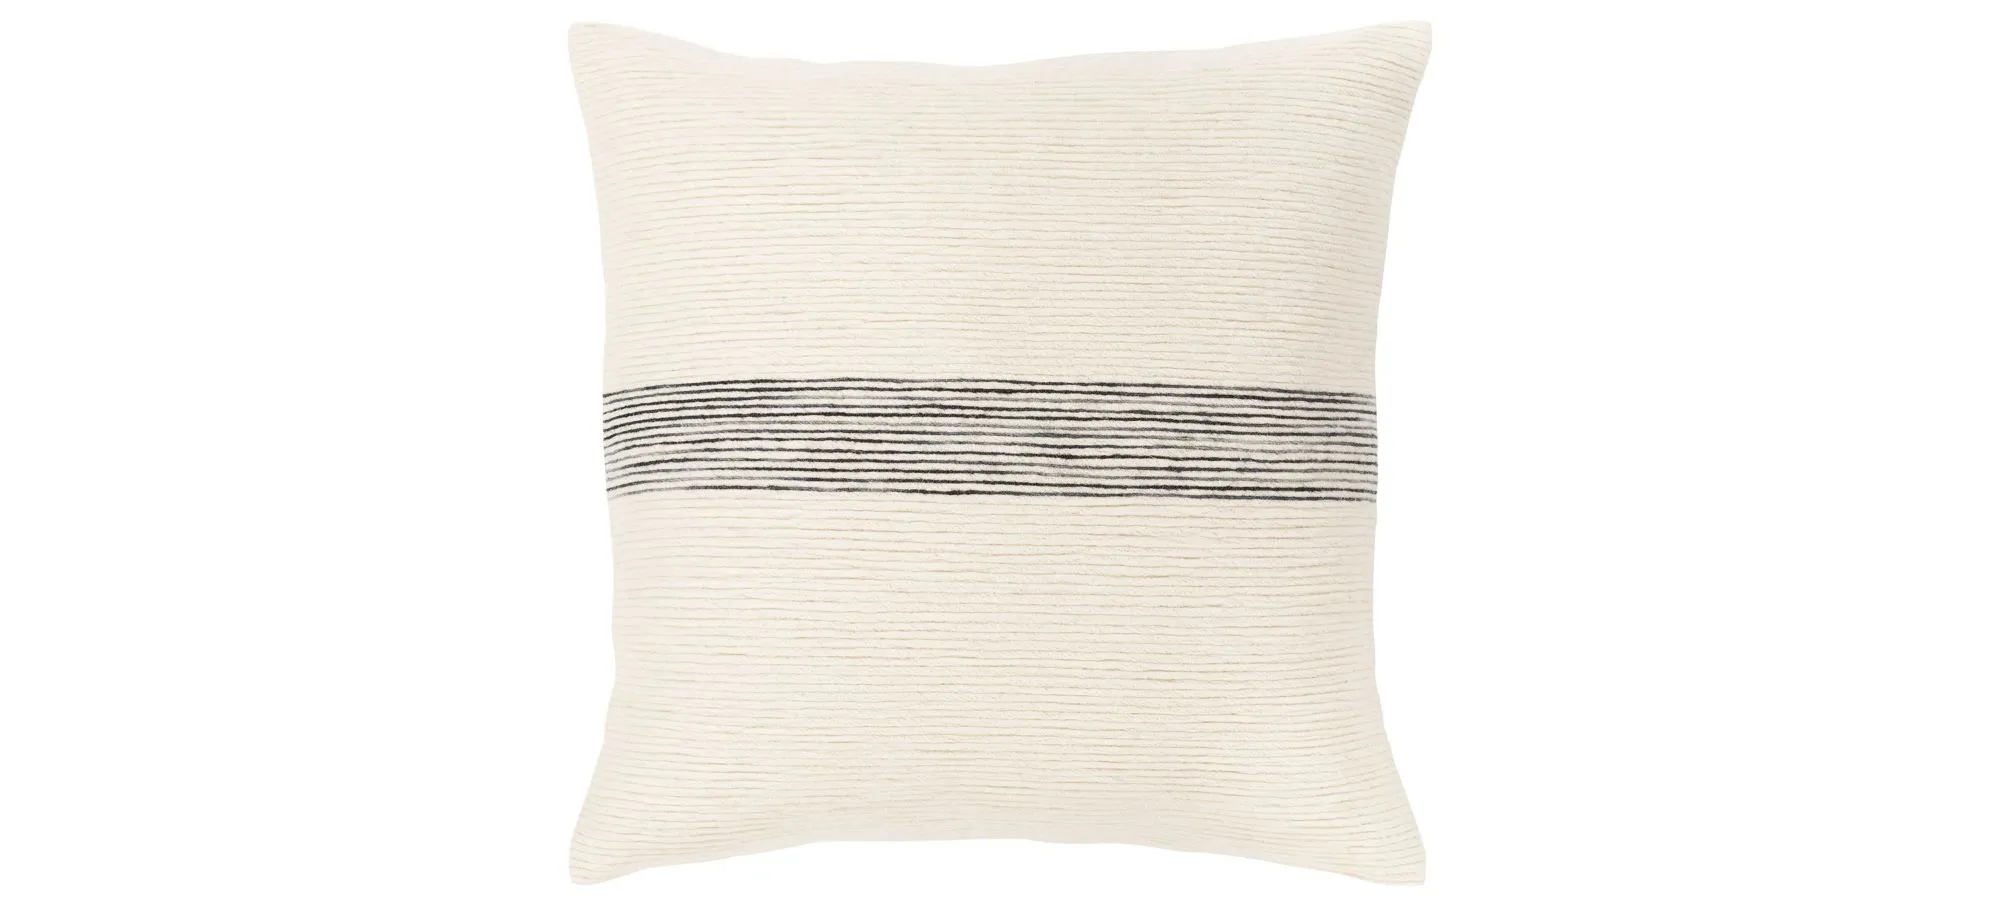 Carine 20" Down Filled Throw Pillow in Cream, Ivory, Black, Charcoal by Surya